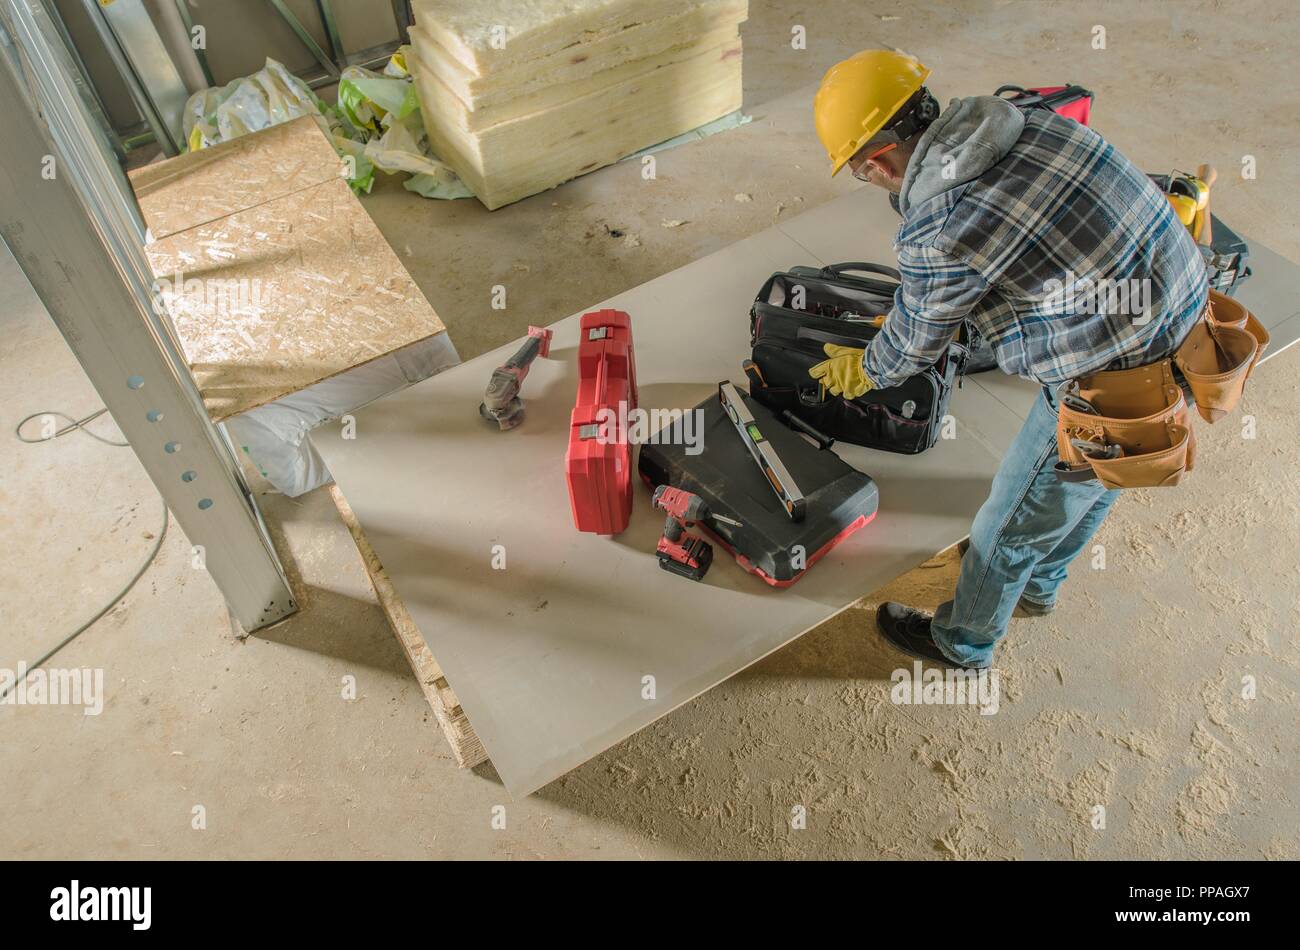 Construction Job To Do. Caucasian Contractor Worker in His 30s Inside Newly Developed Steel Frame Building. Stock Photo